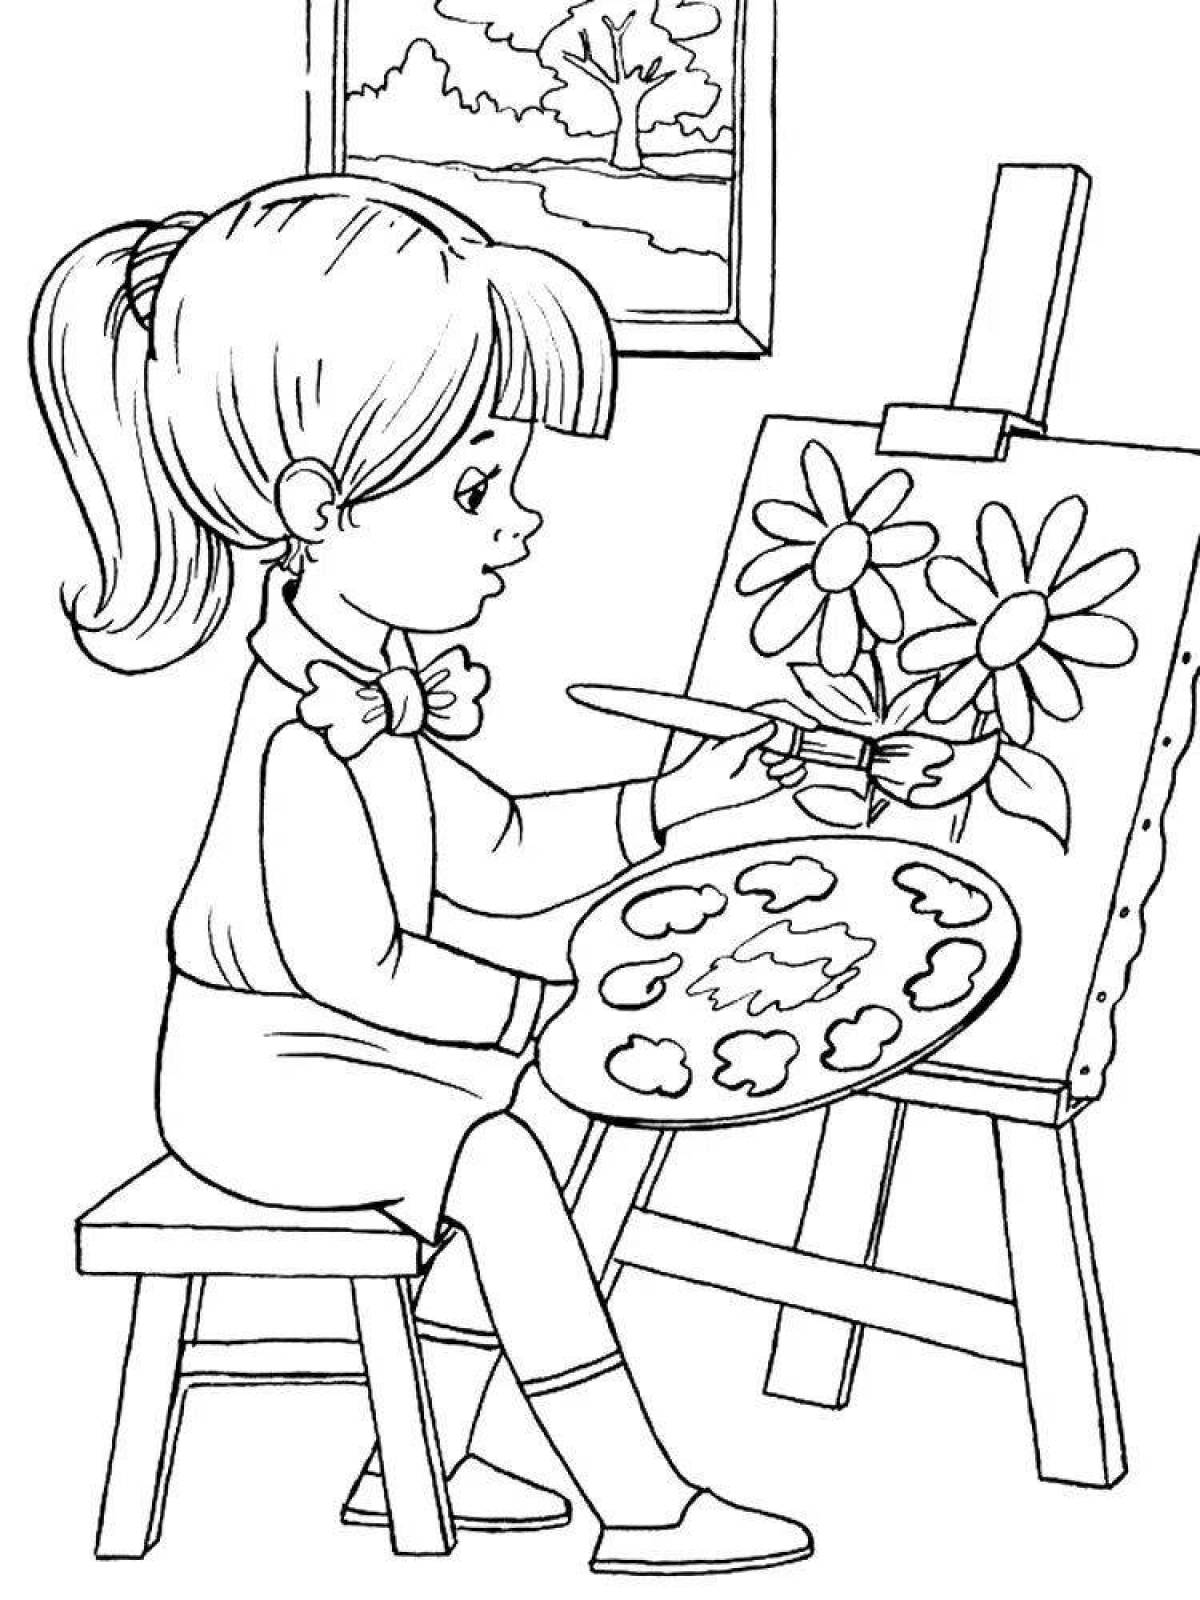 Coloring splatter coloring how to draw a coloring book